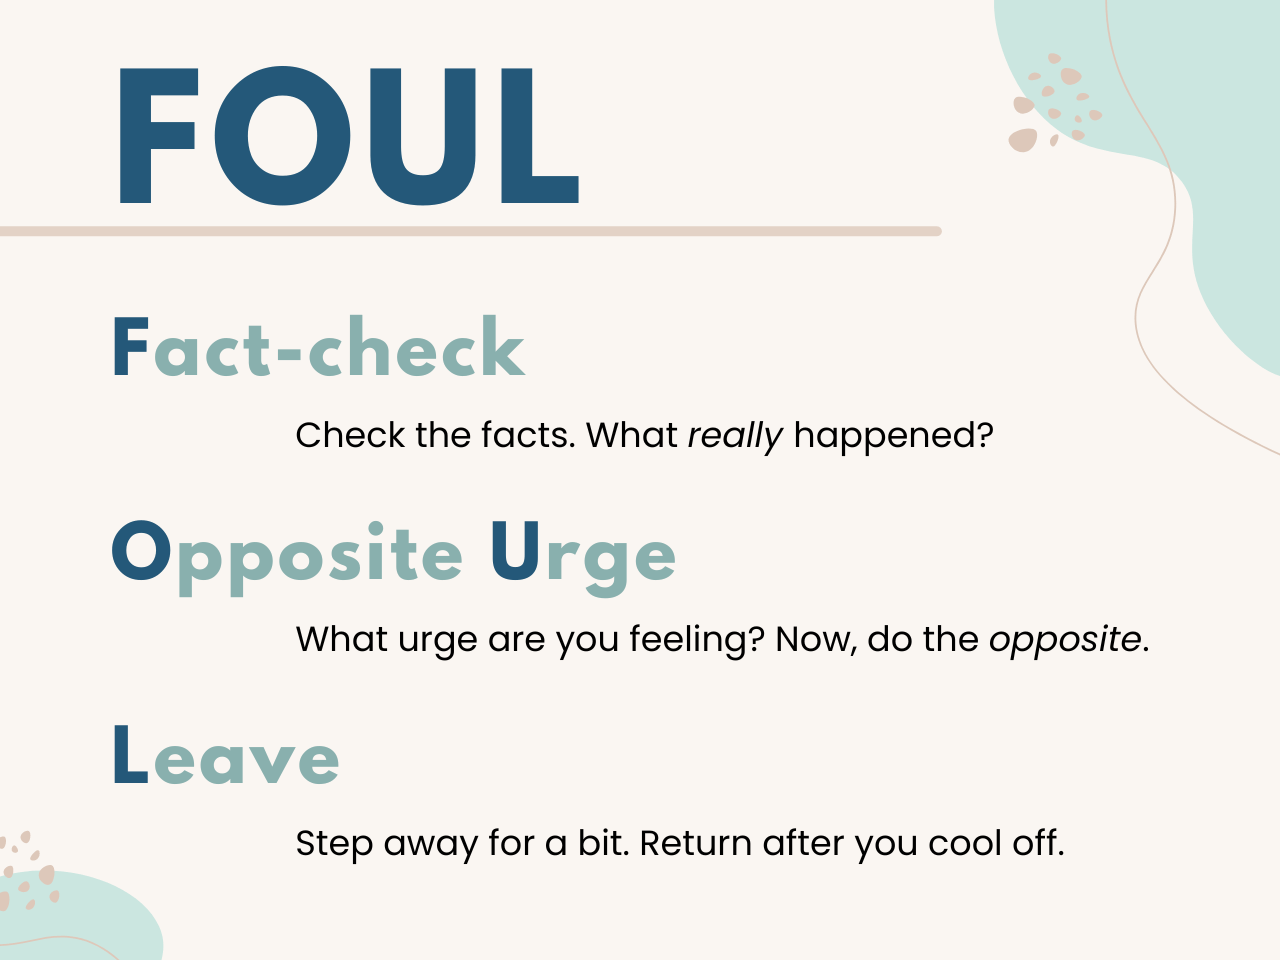 A graphic showing the steps of the FOUL method in shades of teal on pastel blue background. 1st line: Fact-check - Check the facts. What really happened? 2nd line: Opposite Urge - What urge are you feeling? Now, do the opposite. 3rd line: Leave - Step away for a bit. Return after you cool off. 